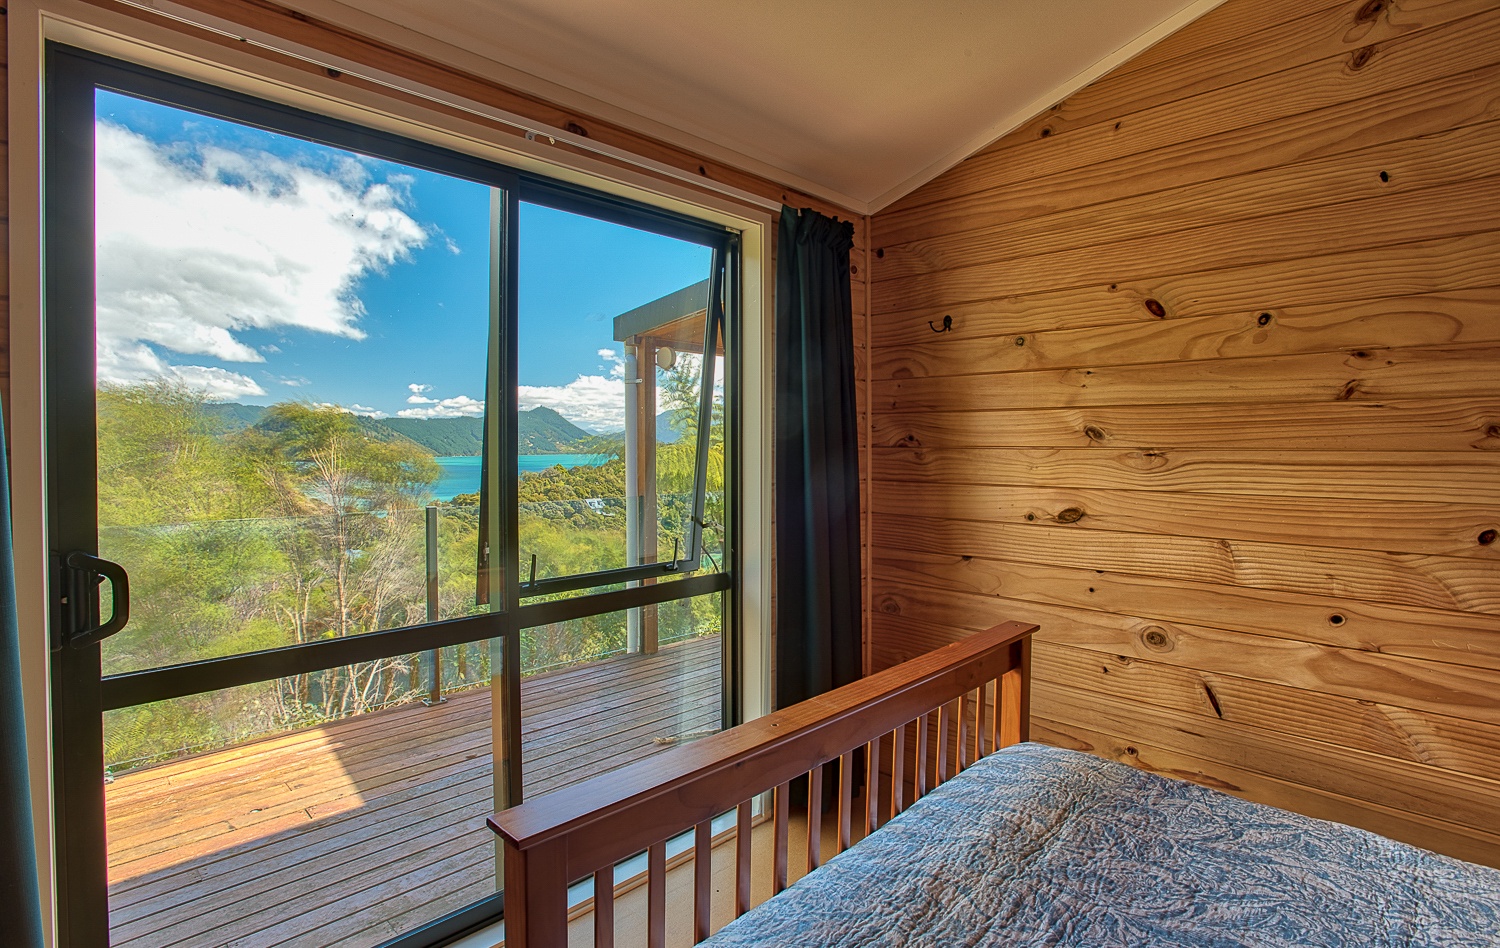 Full/double bed in this room with access to deck and views